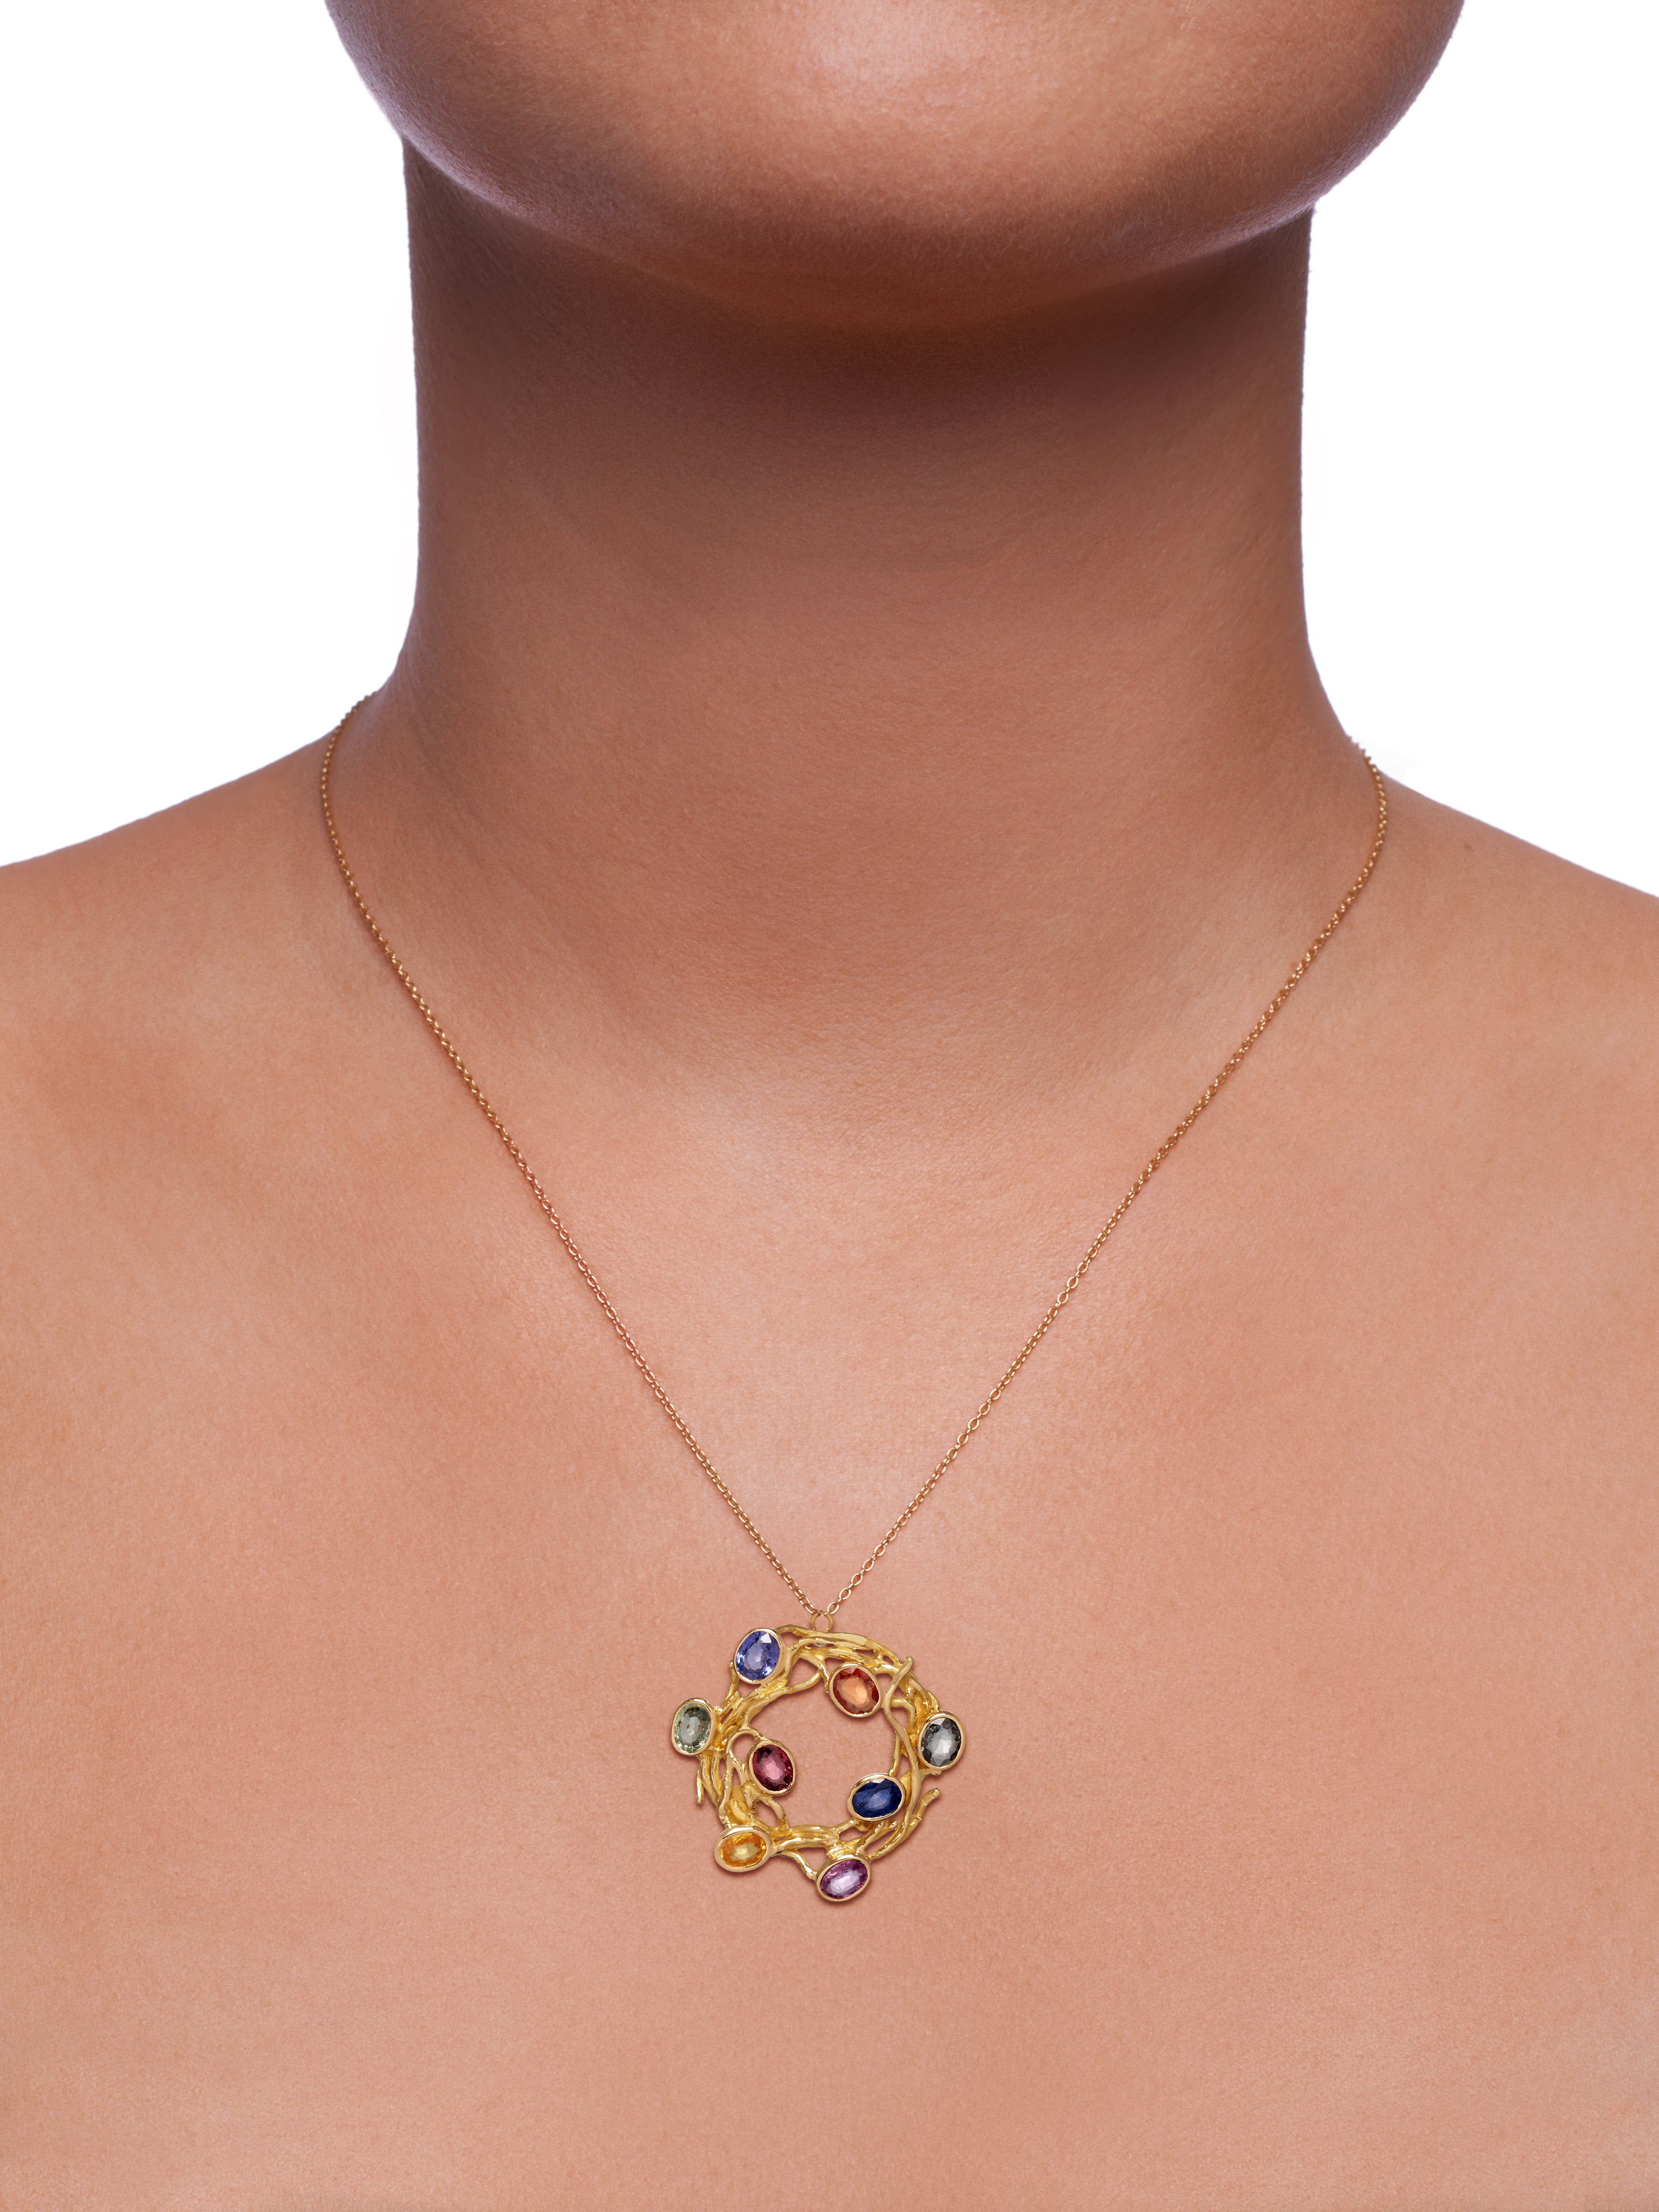 Necklace with Colourful Sapphires